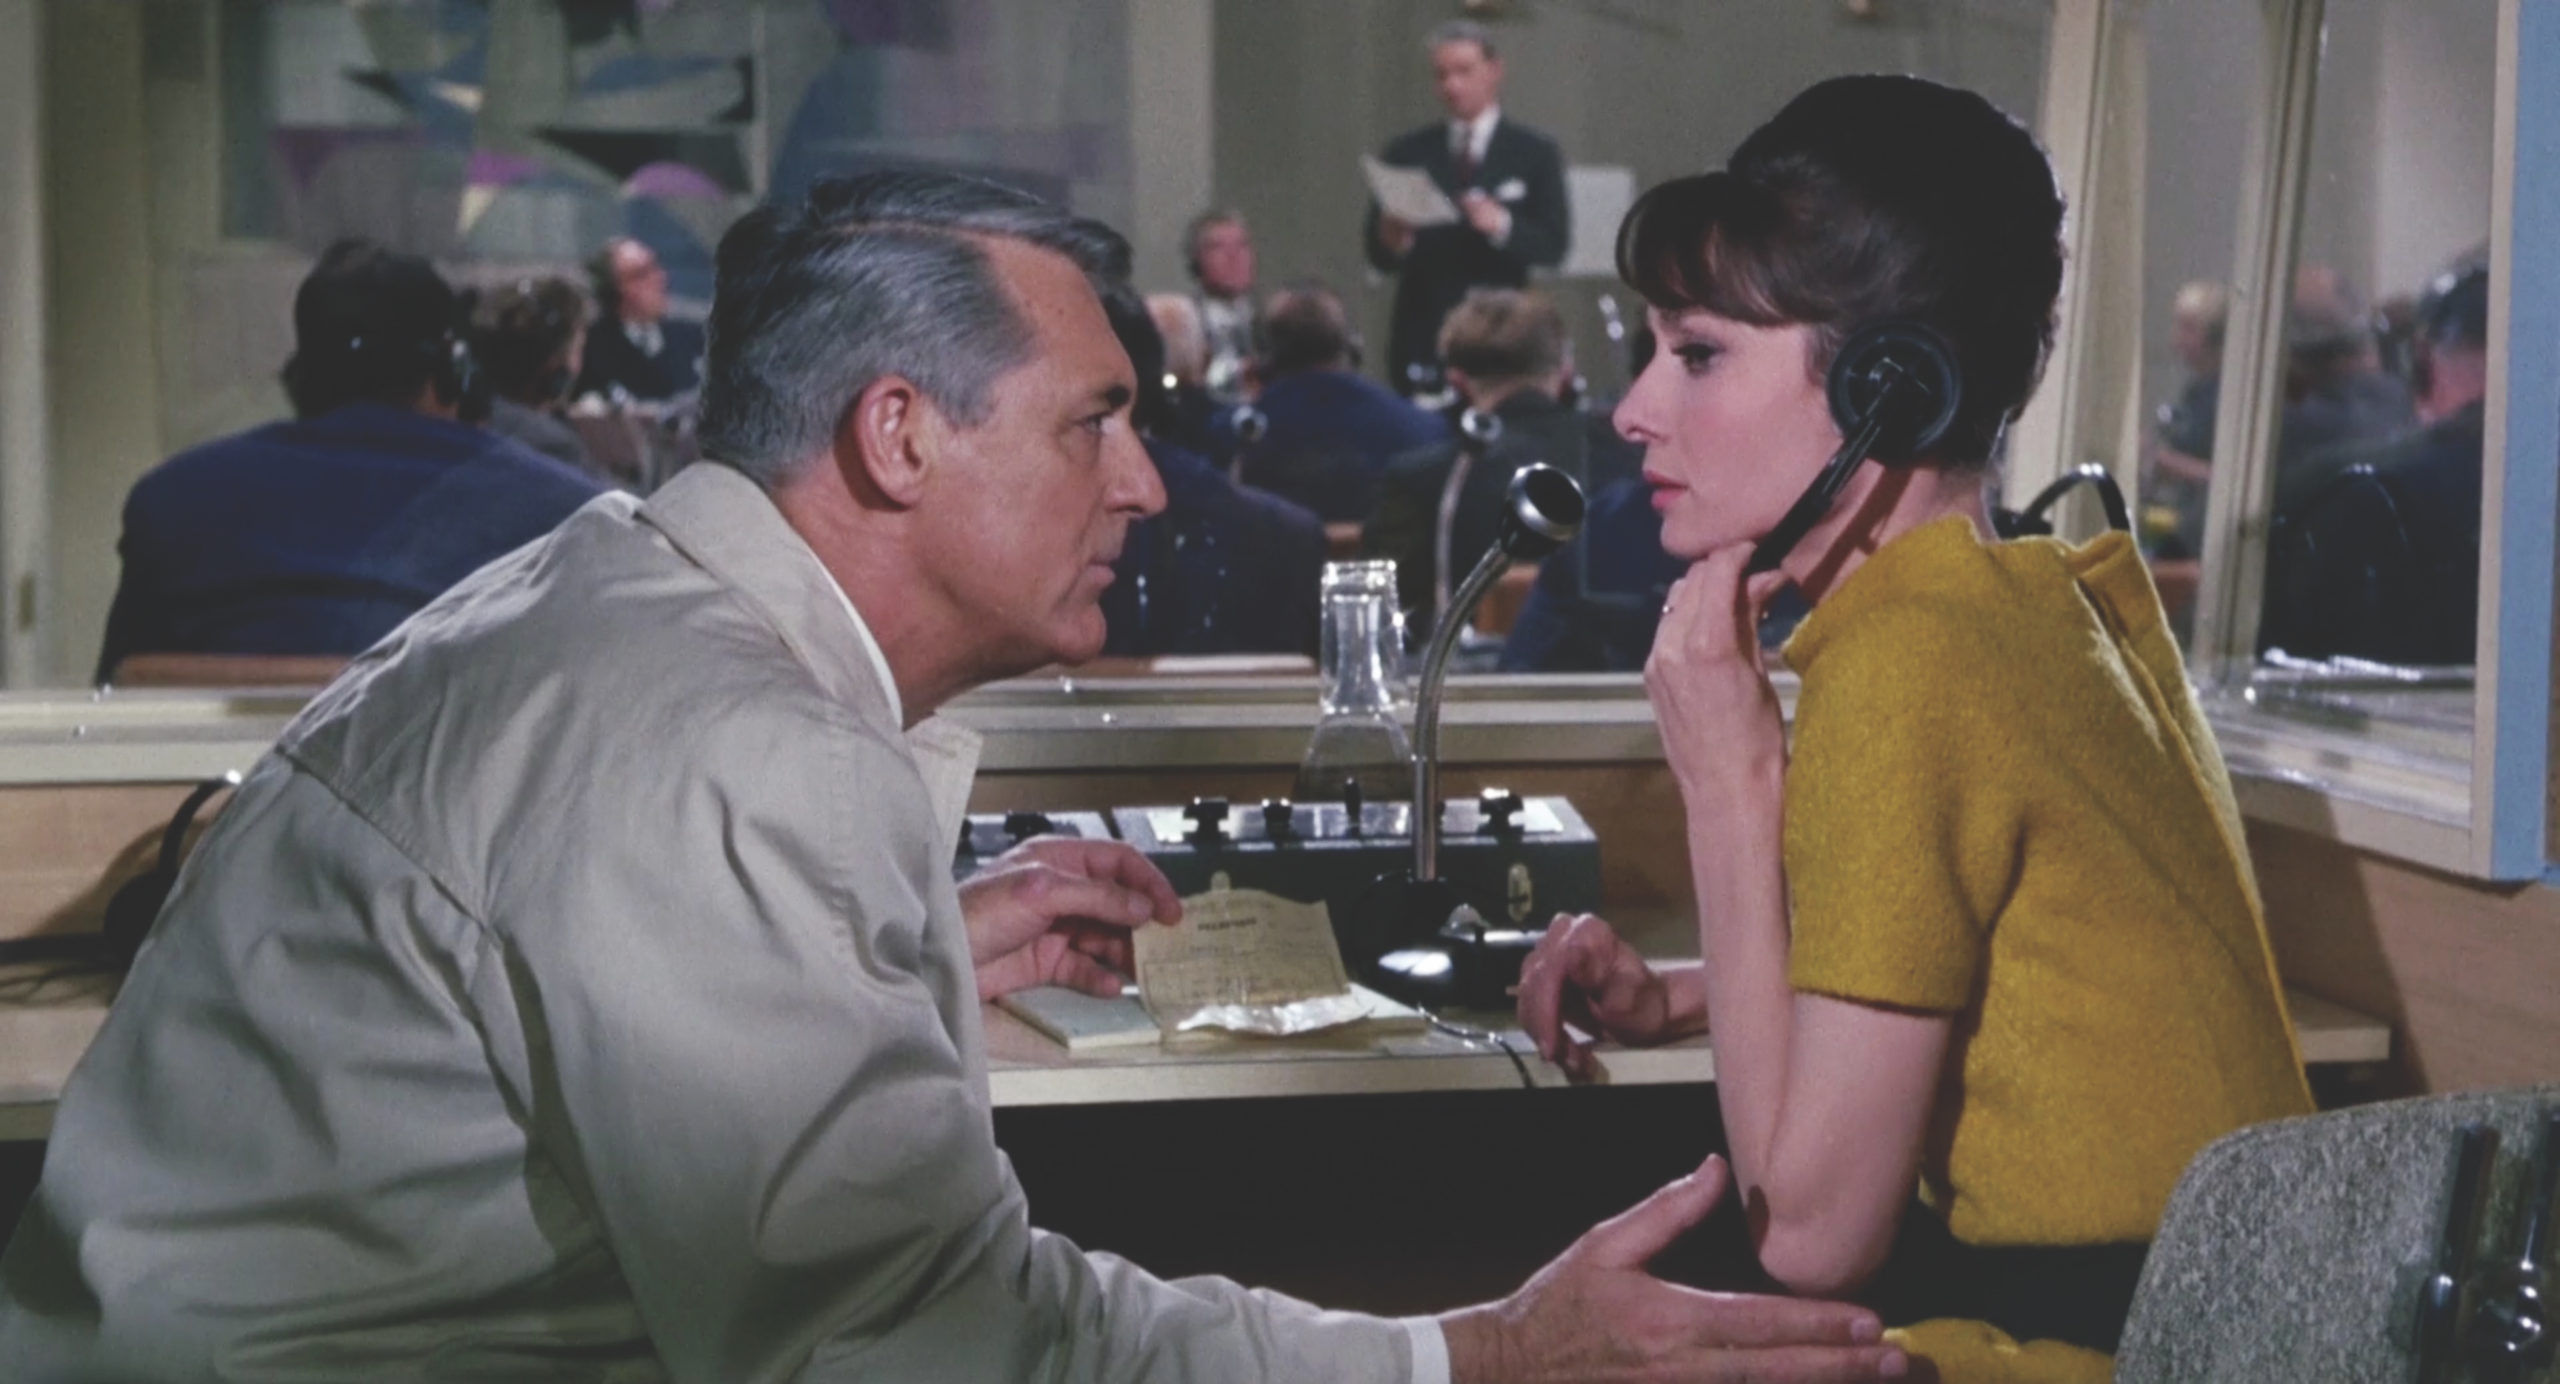 Charade is a rom-com starring Audrey Hepburn and Cary Grant. (Film still courtesy of CELINE)